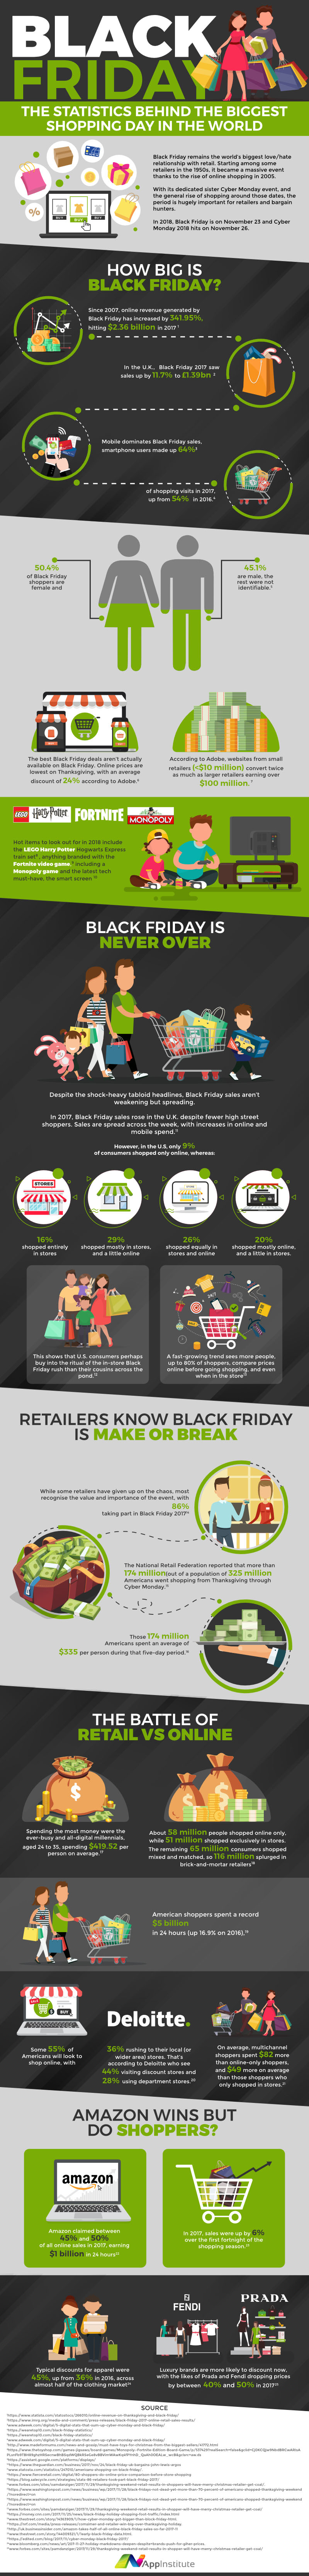 Black Friday: Statistics Behind the Biggest Shopping Day in the World